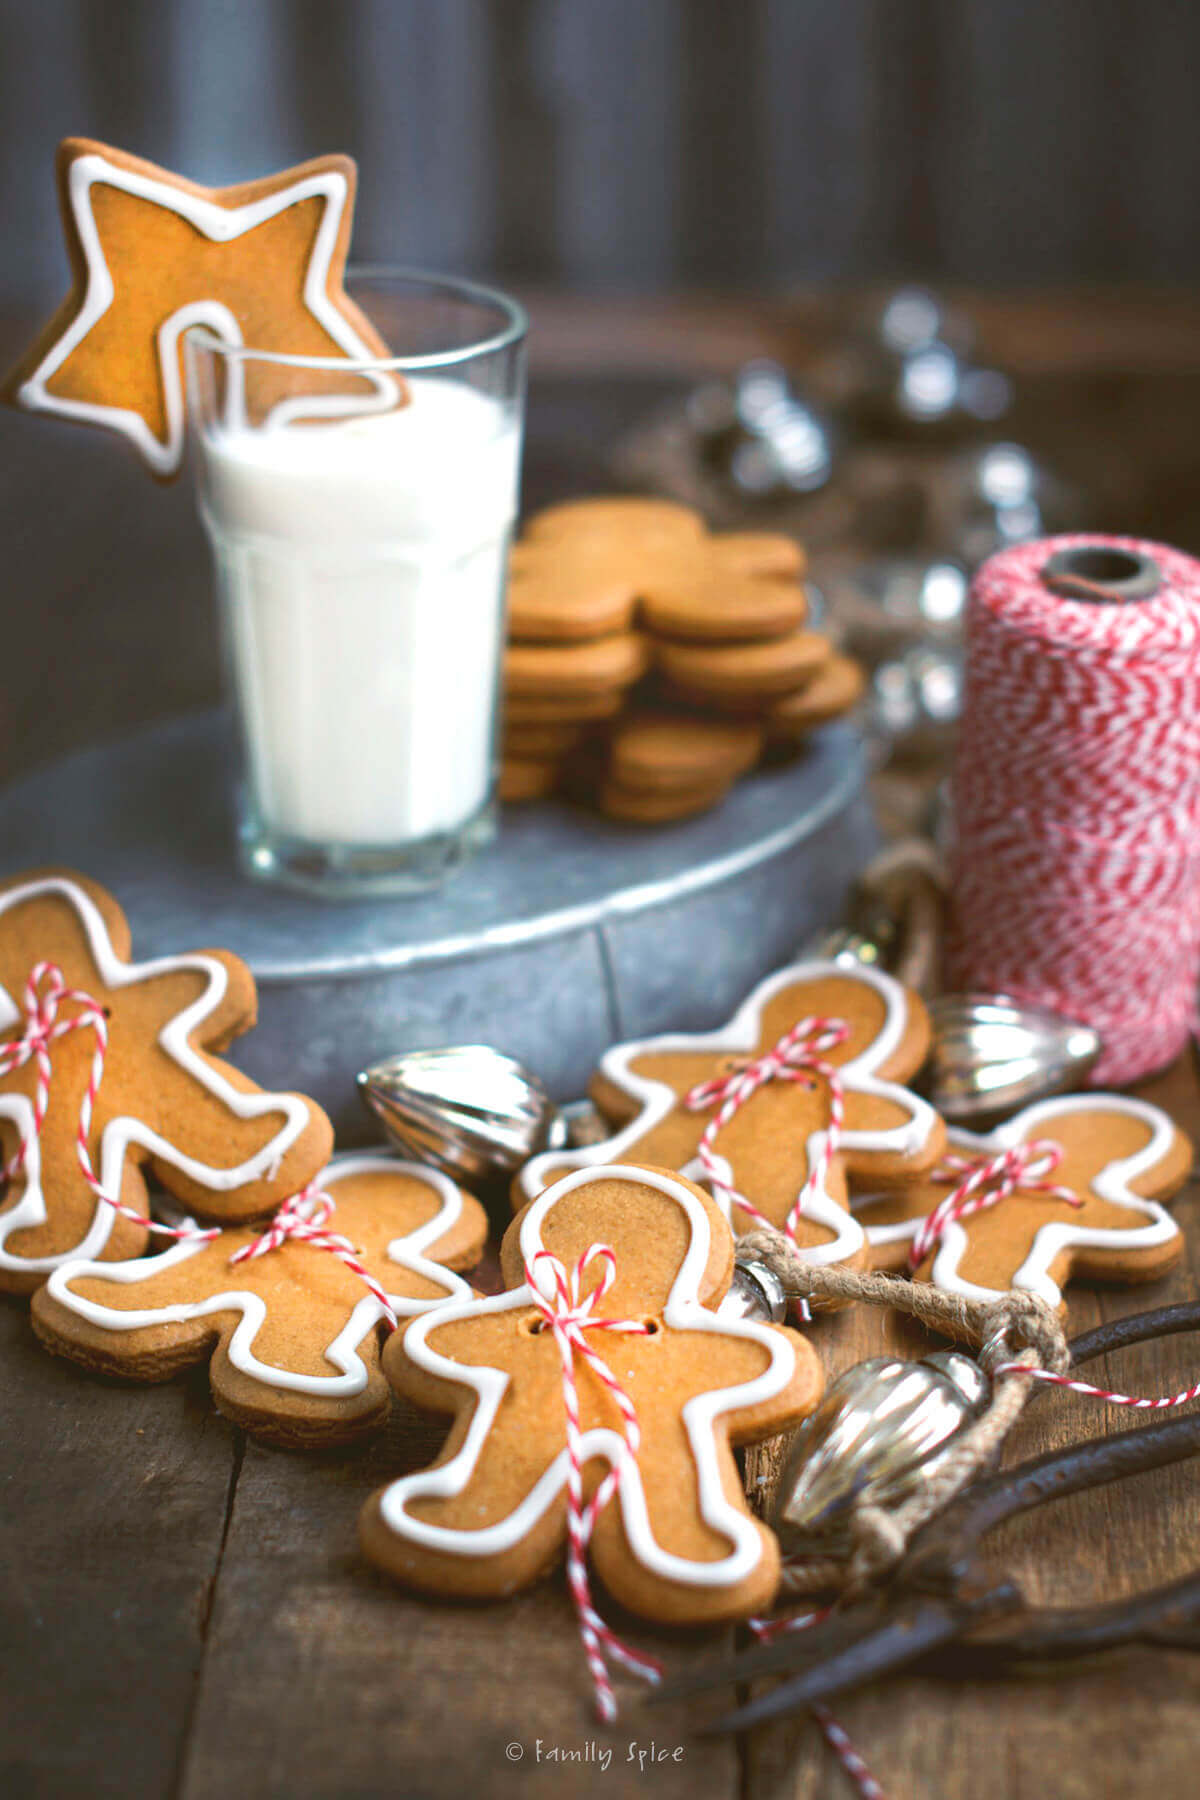 A star gingerbread cookie on a glass of milk in the background with gingerbread men around it